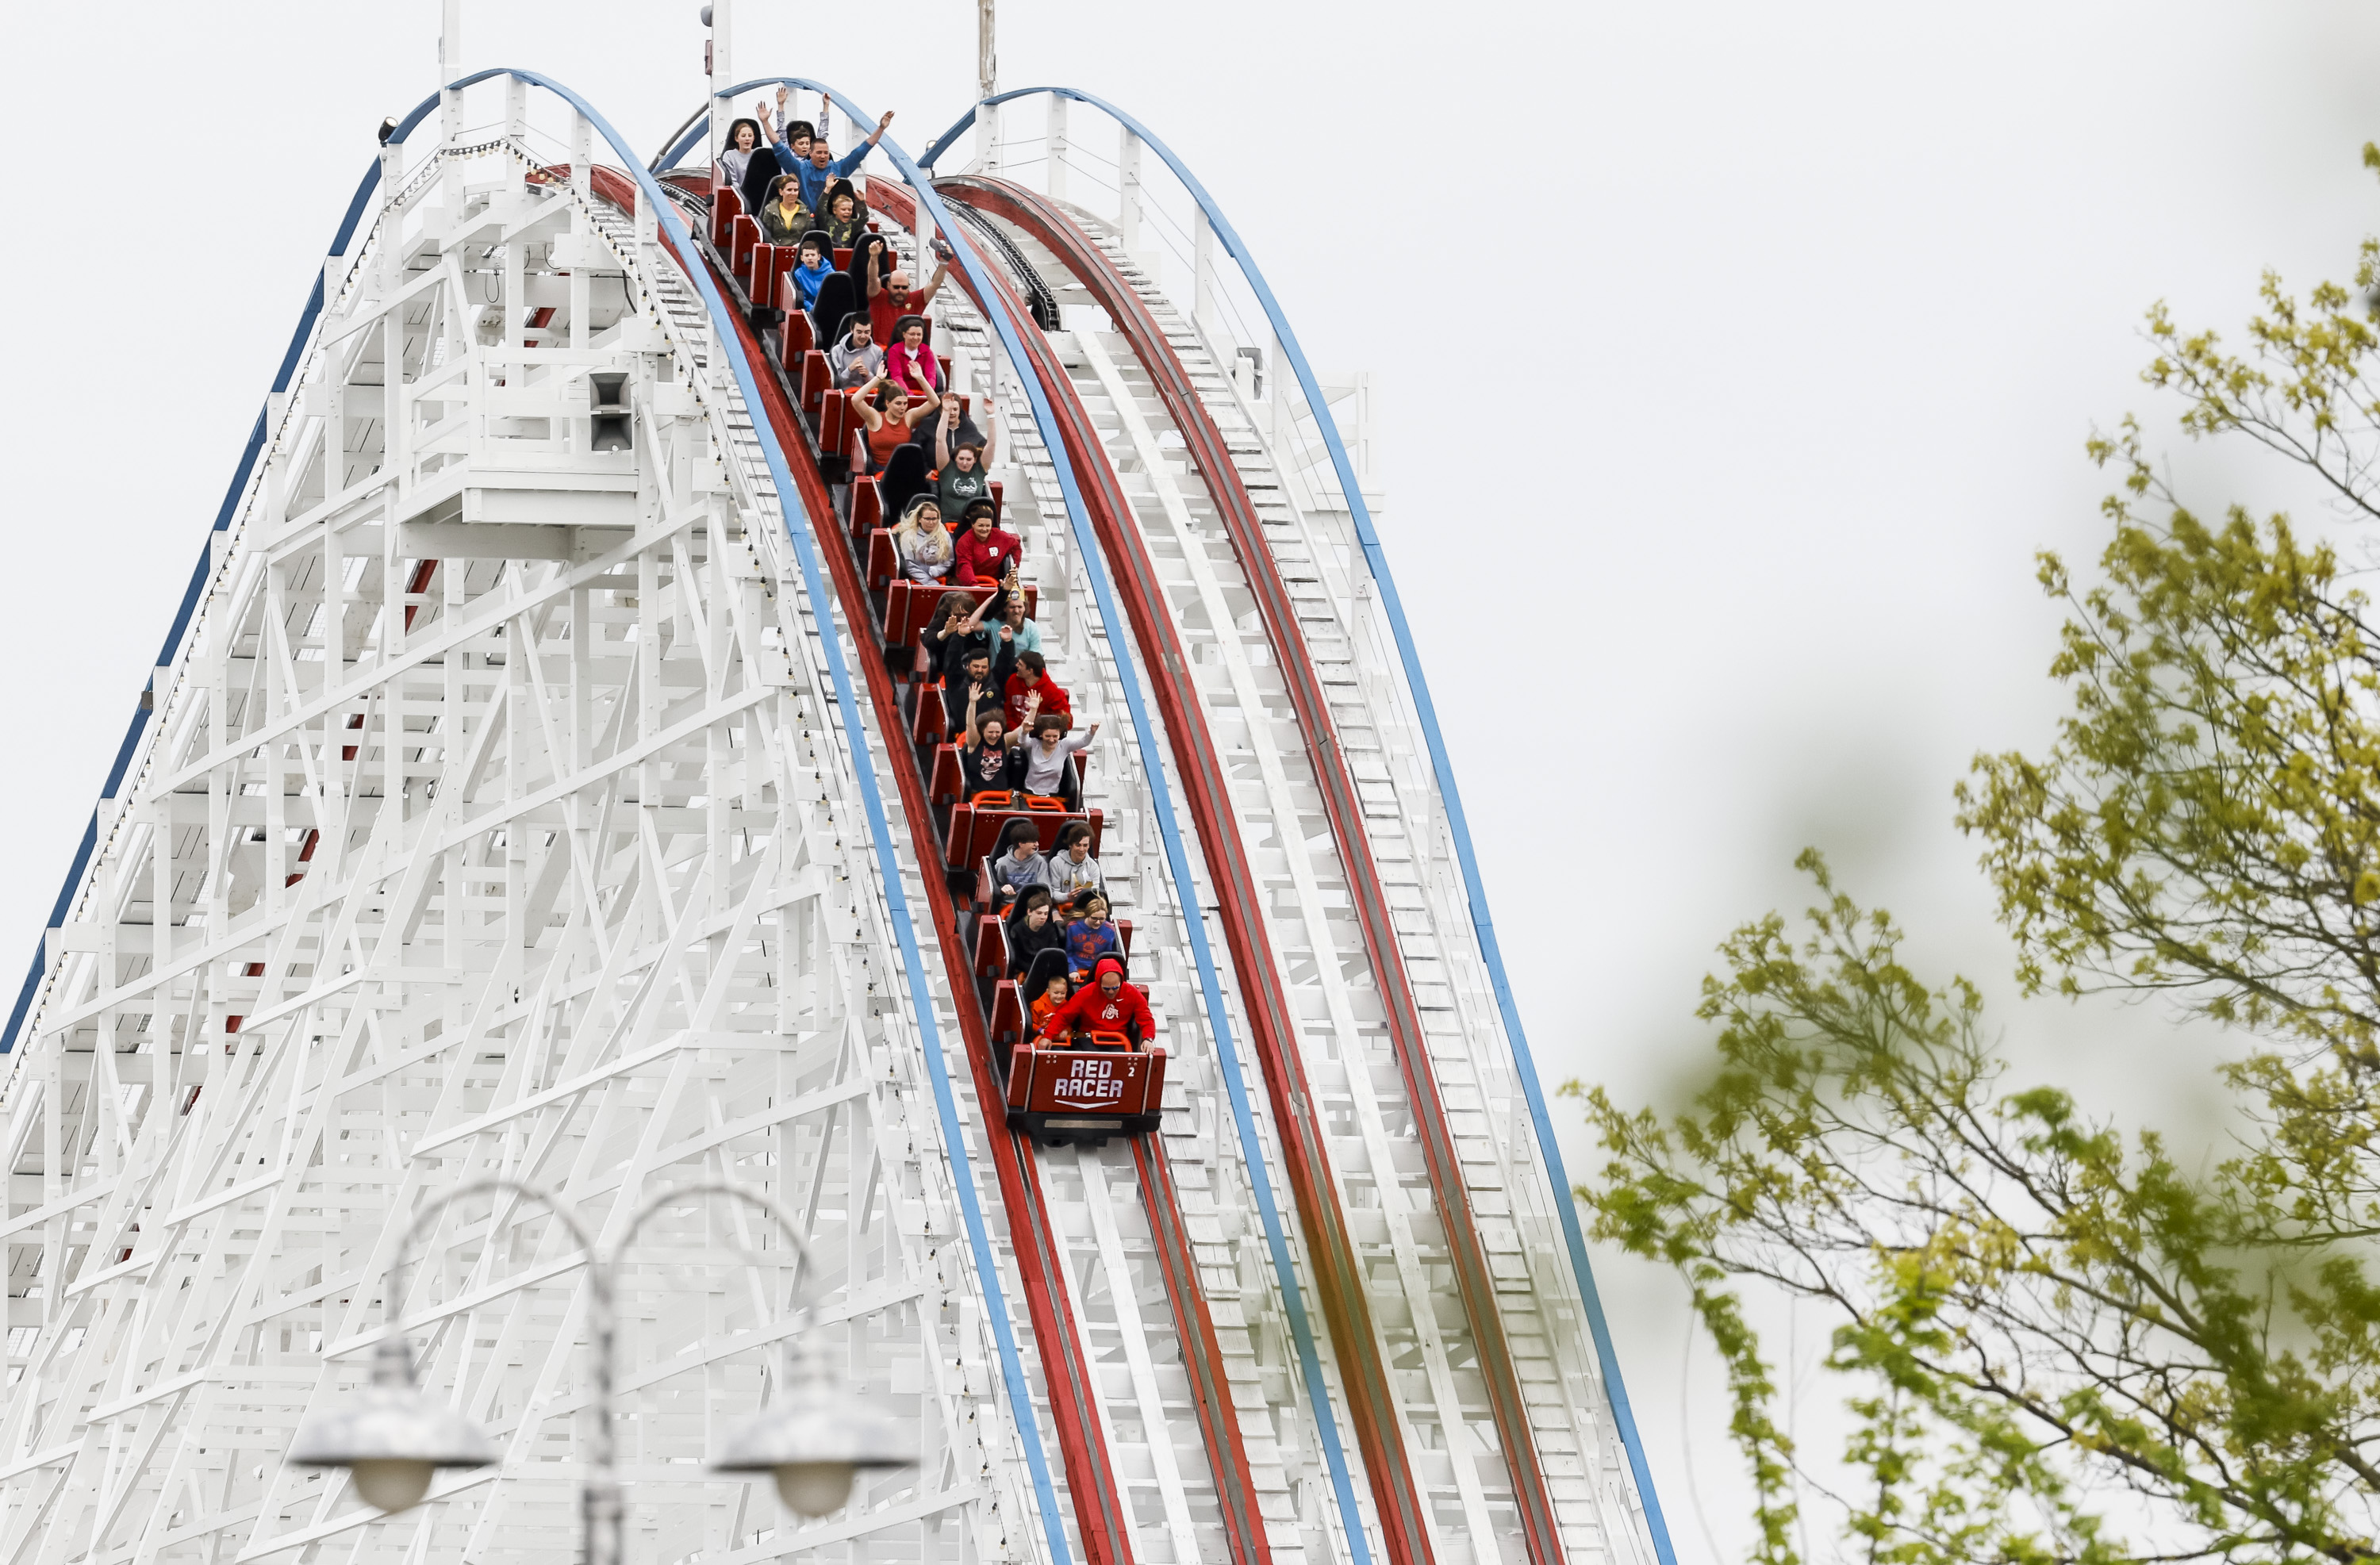 Kings Island opens for season with over 100 attractions